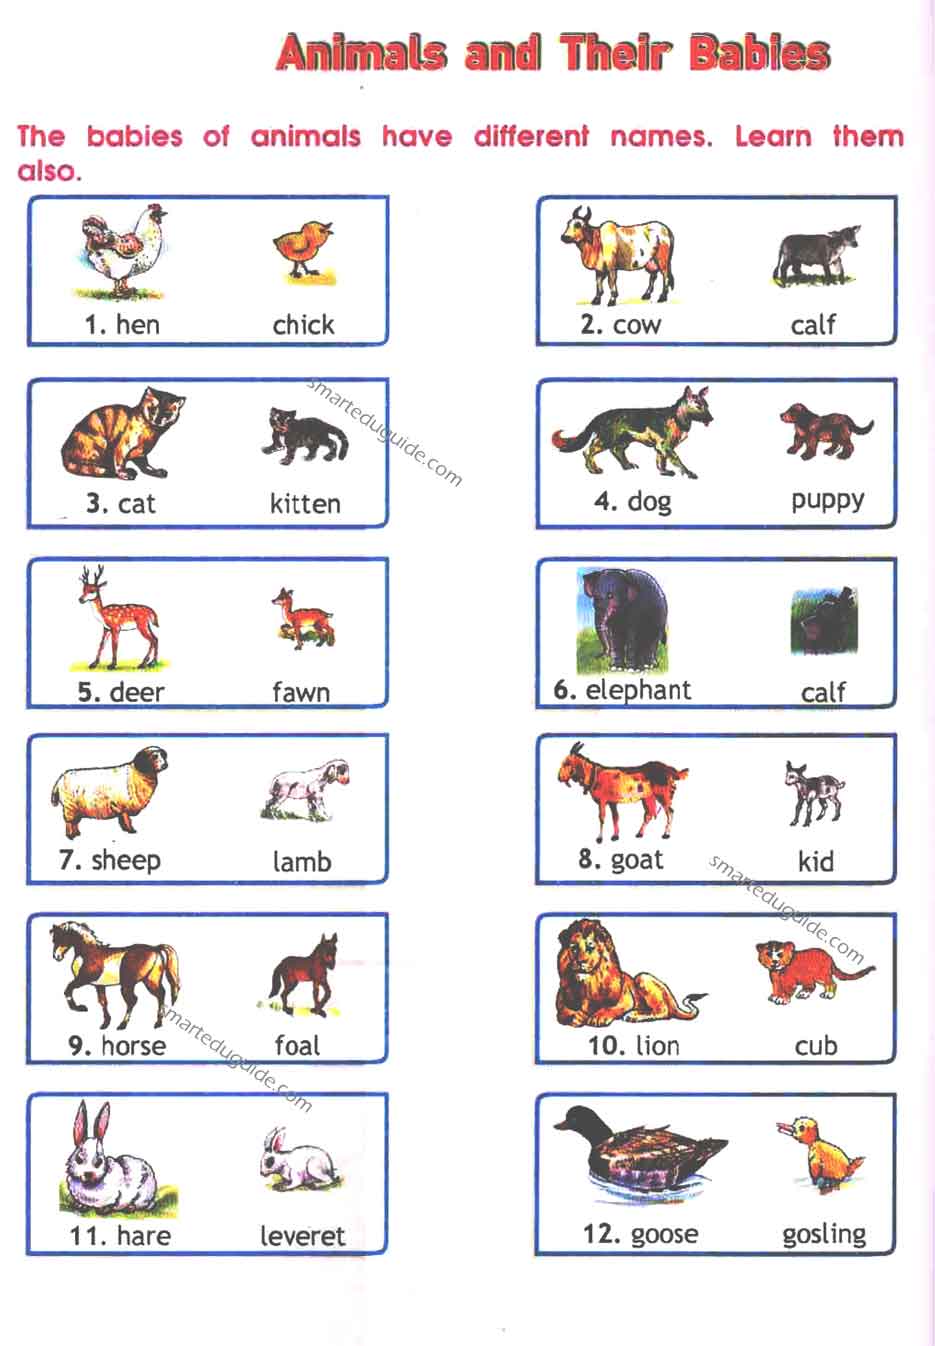 animals and their babies names in english pdf | SEG